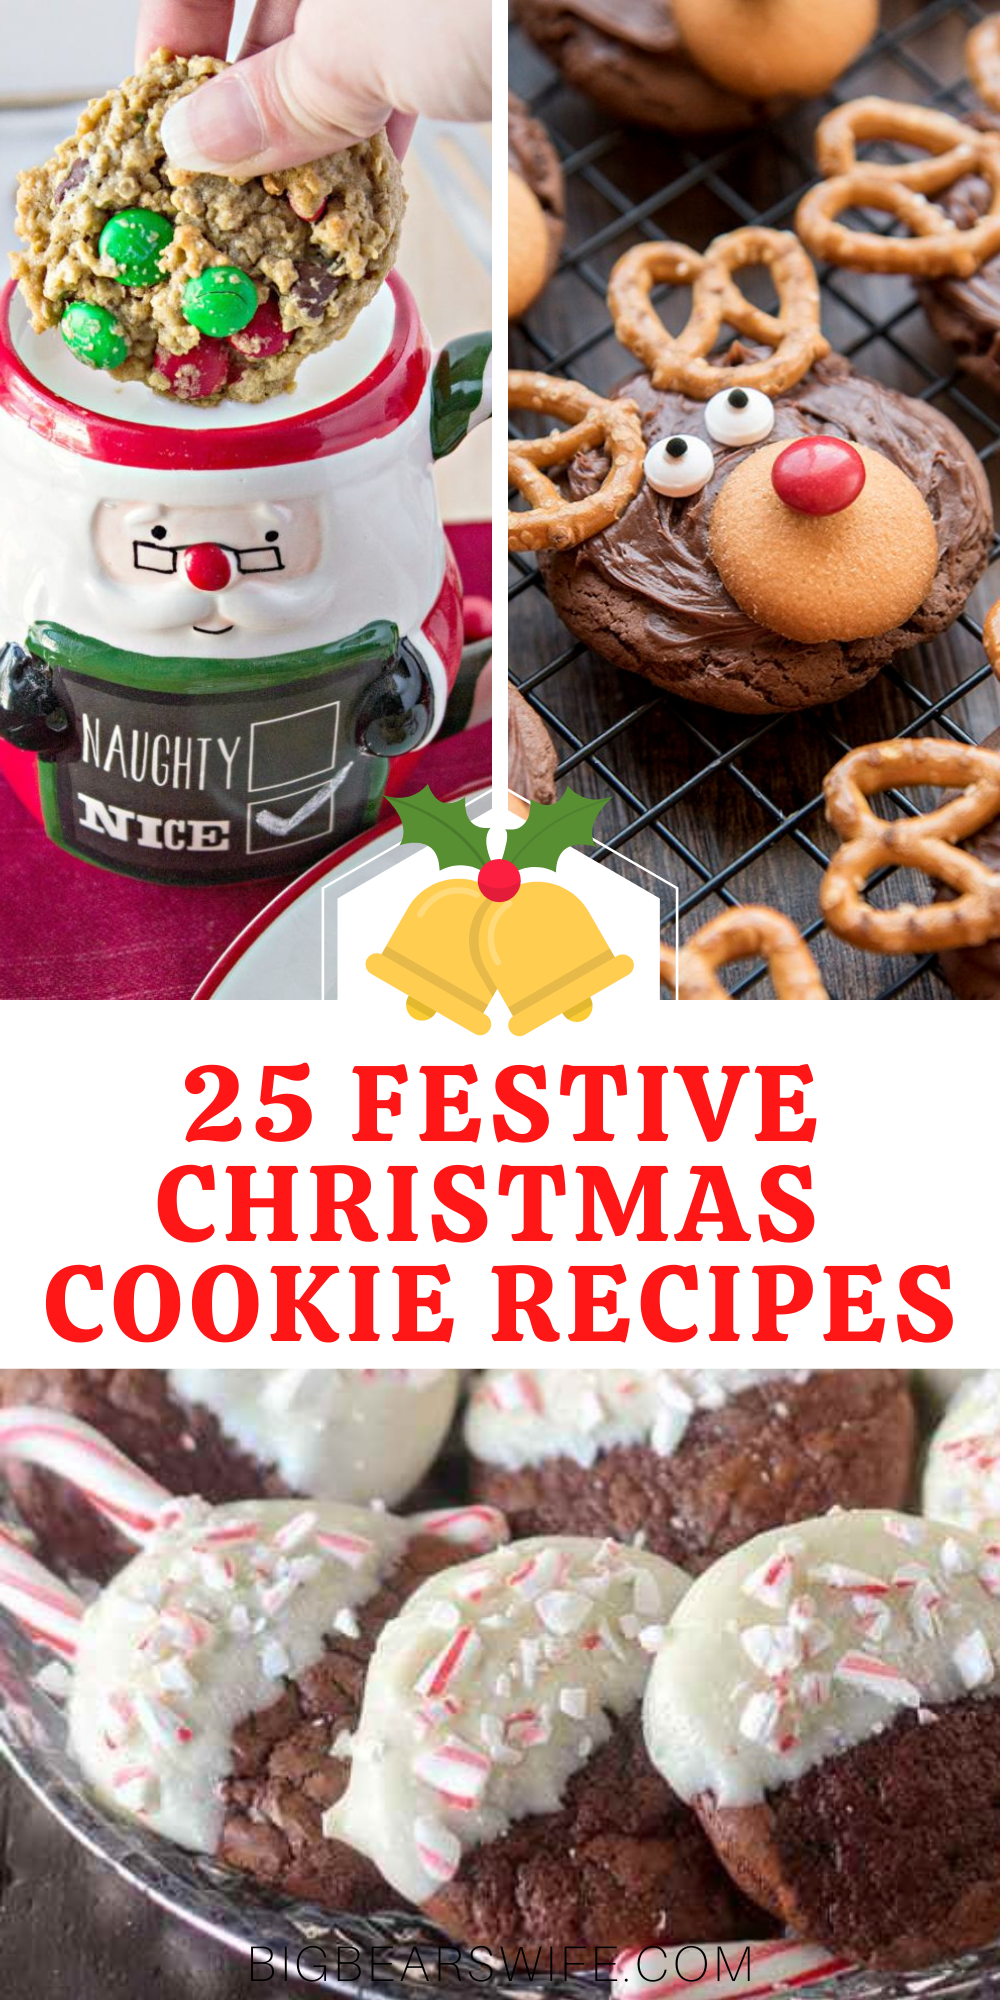 25 Festive Christmas Cookie Recipes - Get into the festive Holiday Spirit with 25 Festive Christmas Cookie Recipes perfect for dessert or gift giving! via @bigbearswife